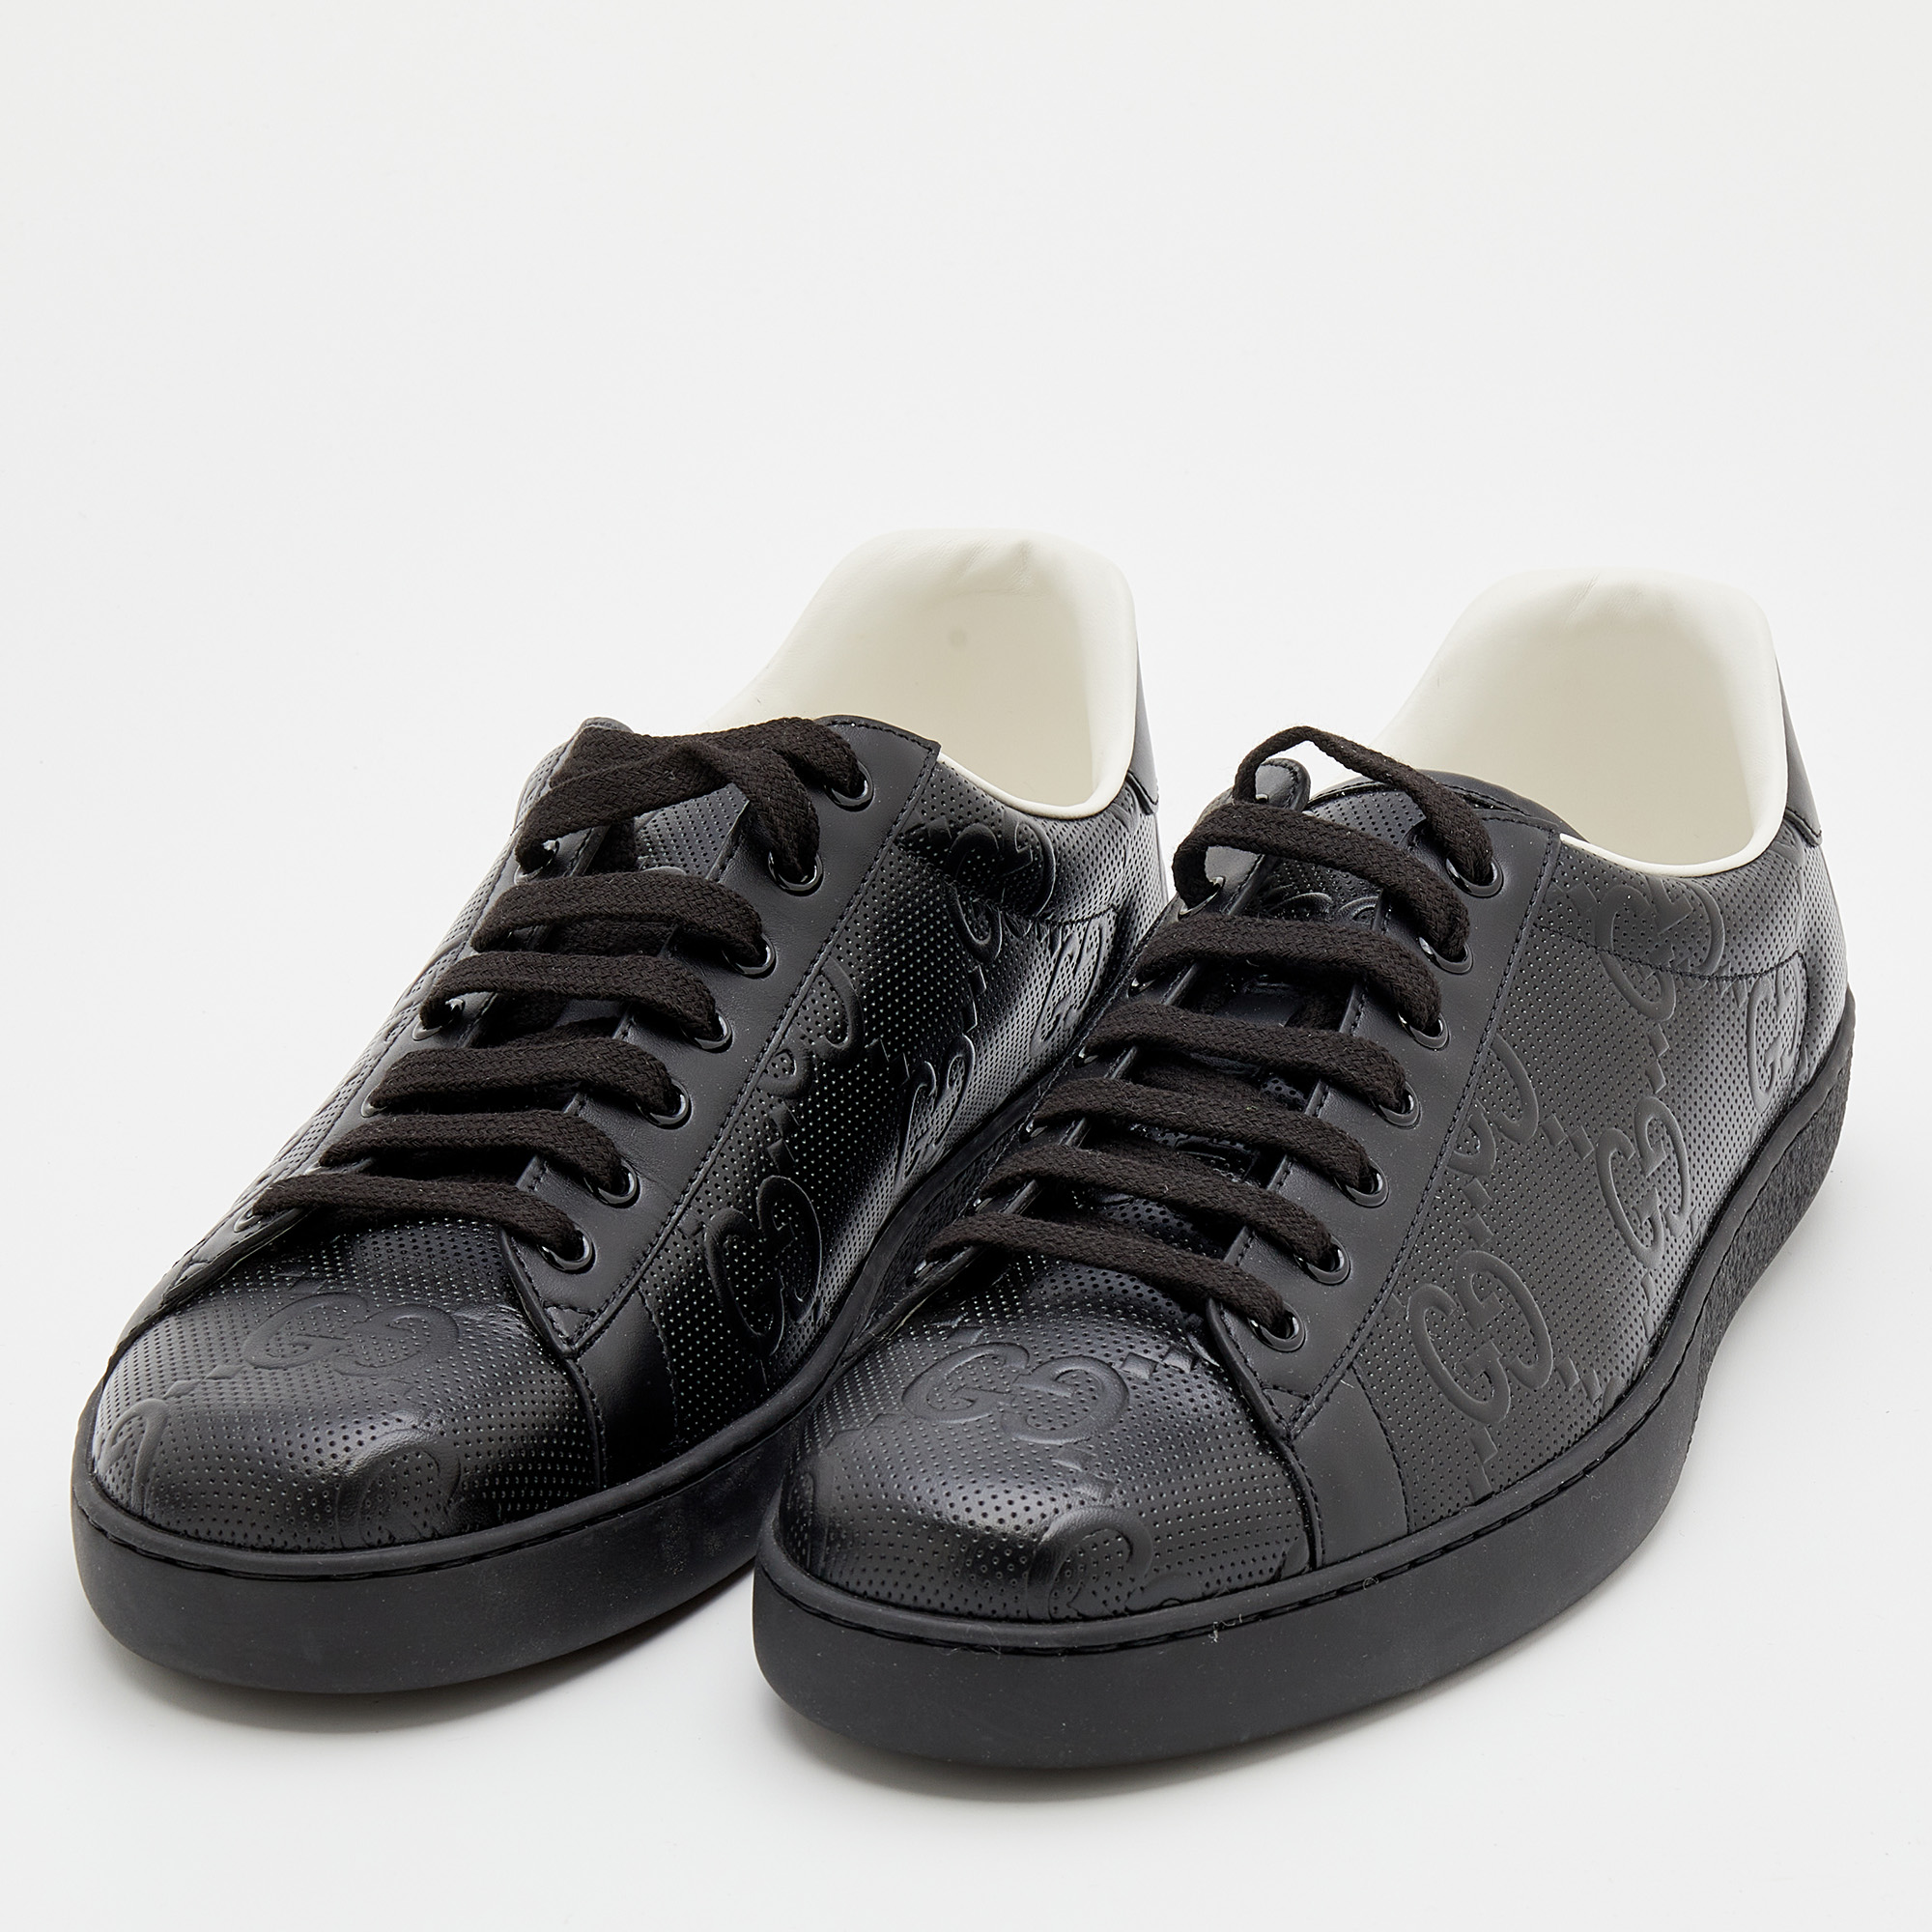 

Gucci Black Perforated GG Embossed Leather Ace Low Top Sneakers Size